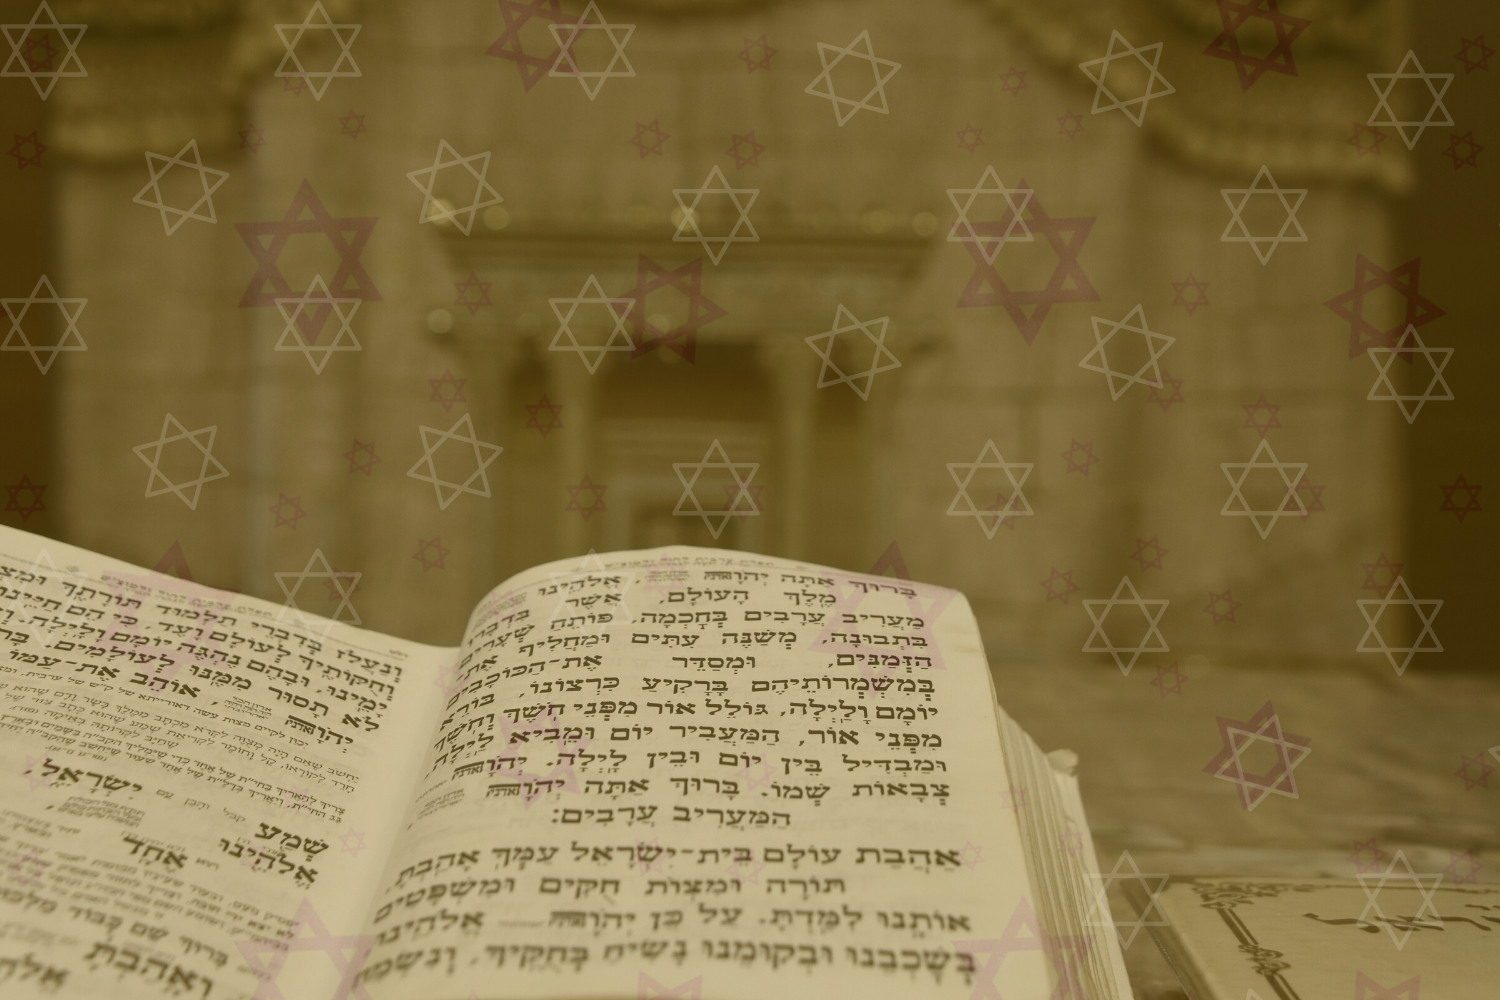 Graphic depicting a Hebrew text inside a synagogue (Hustler Multimedia/Alexa White)